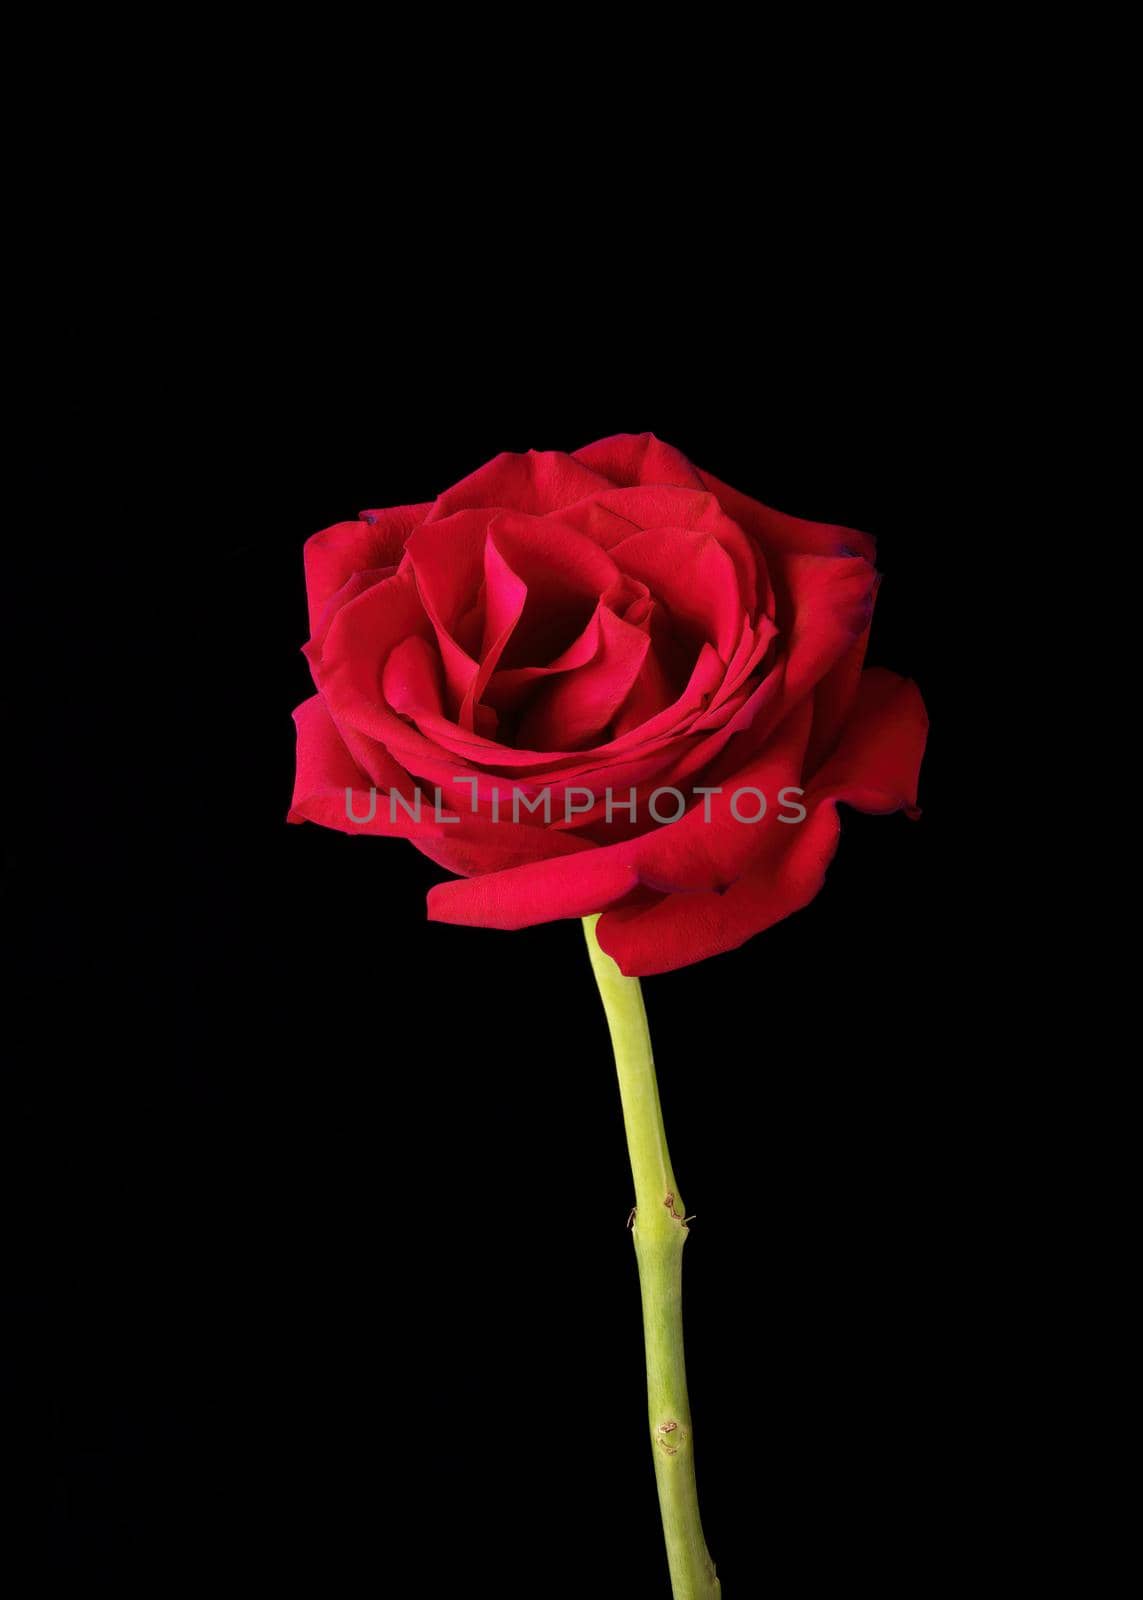 A single American Beauty rose blossom is pictured against a black background.